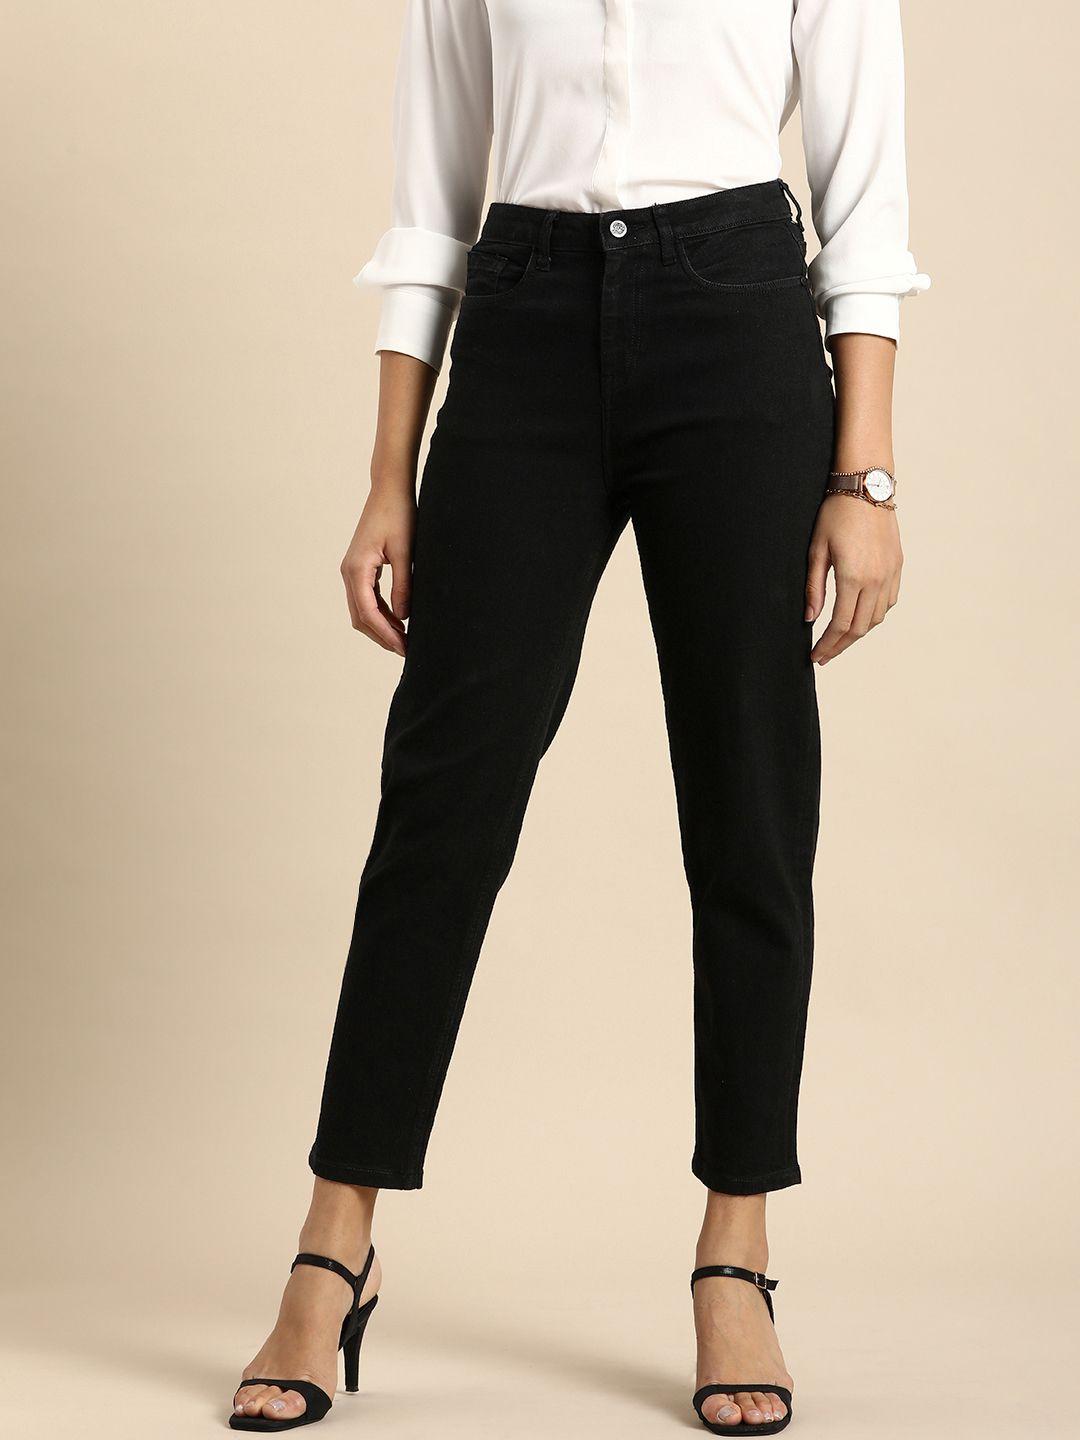 all-about-you-women-slim-mom-fit-high-rise-stretchable-jeans